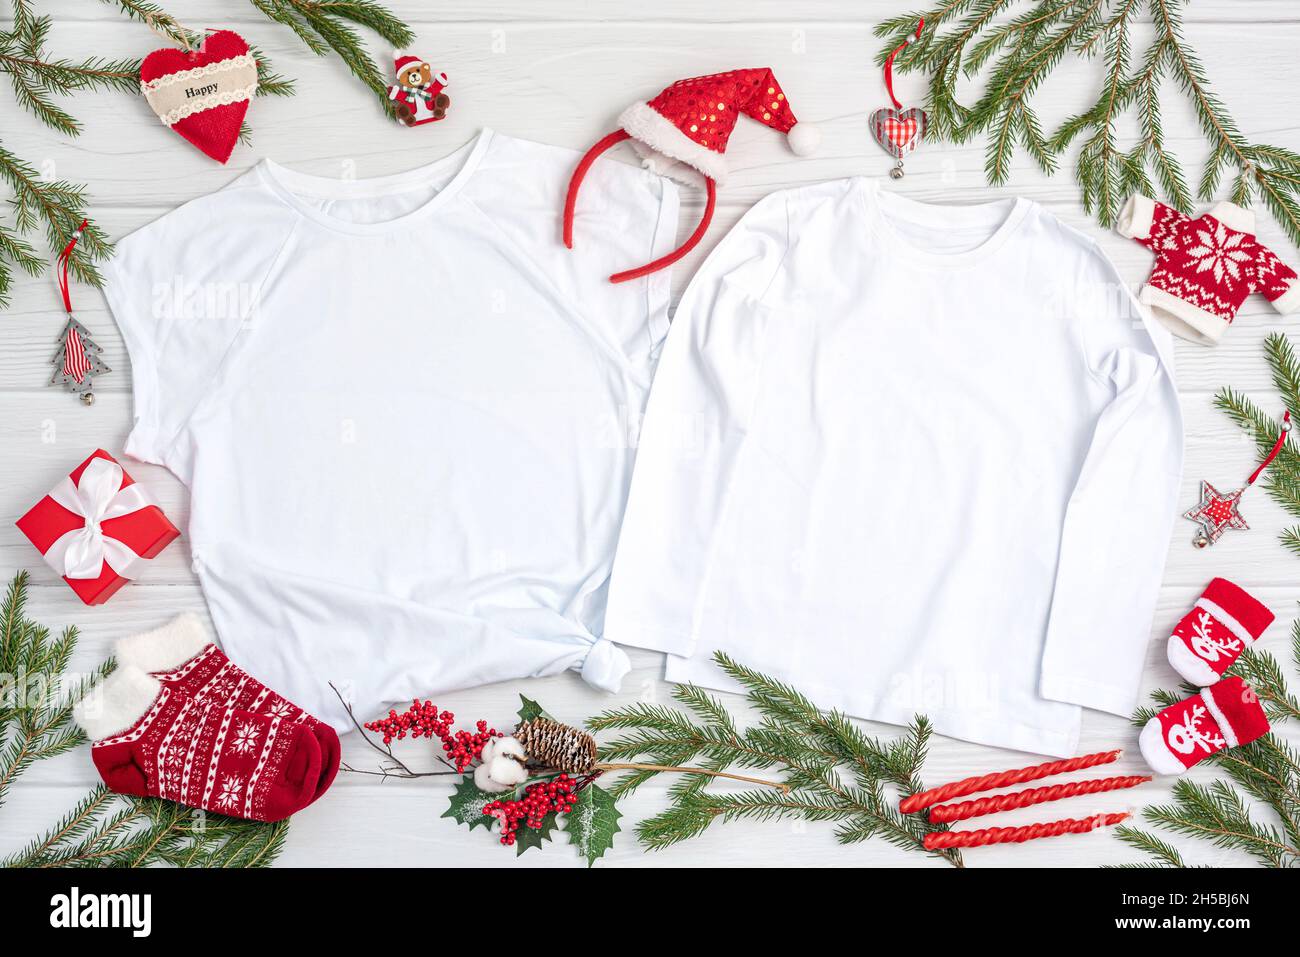 Children clothes with Christmas symbols and decor on table Stock Photo